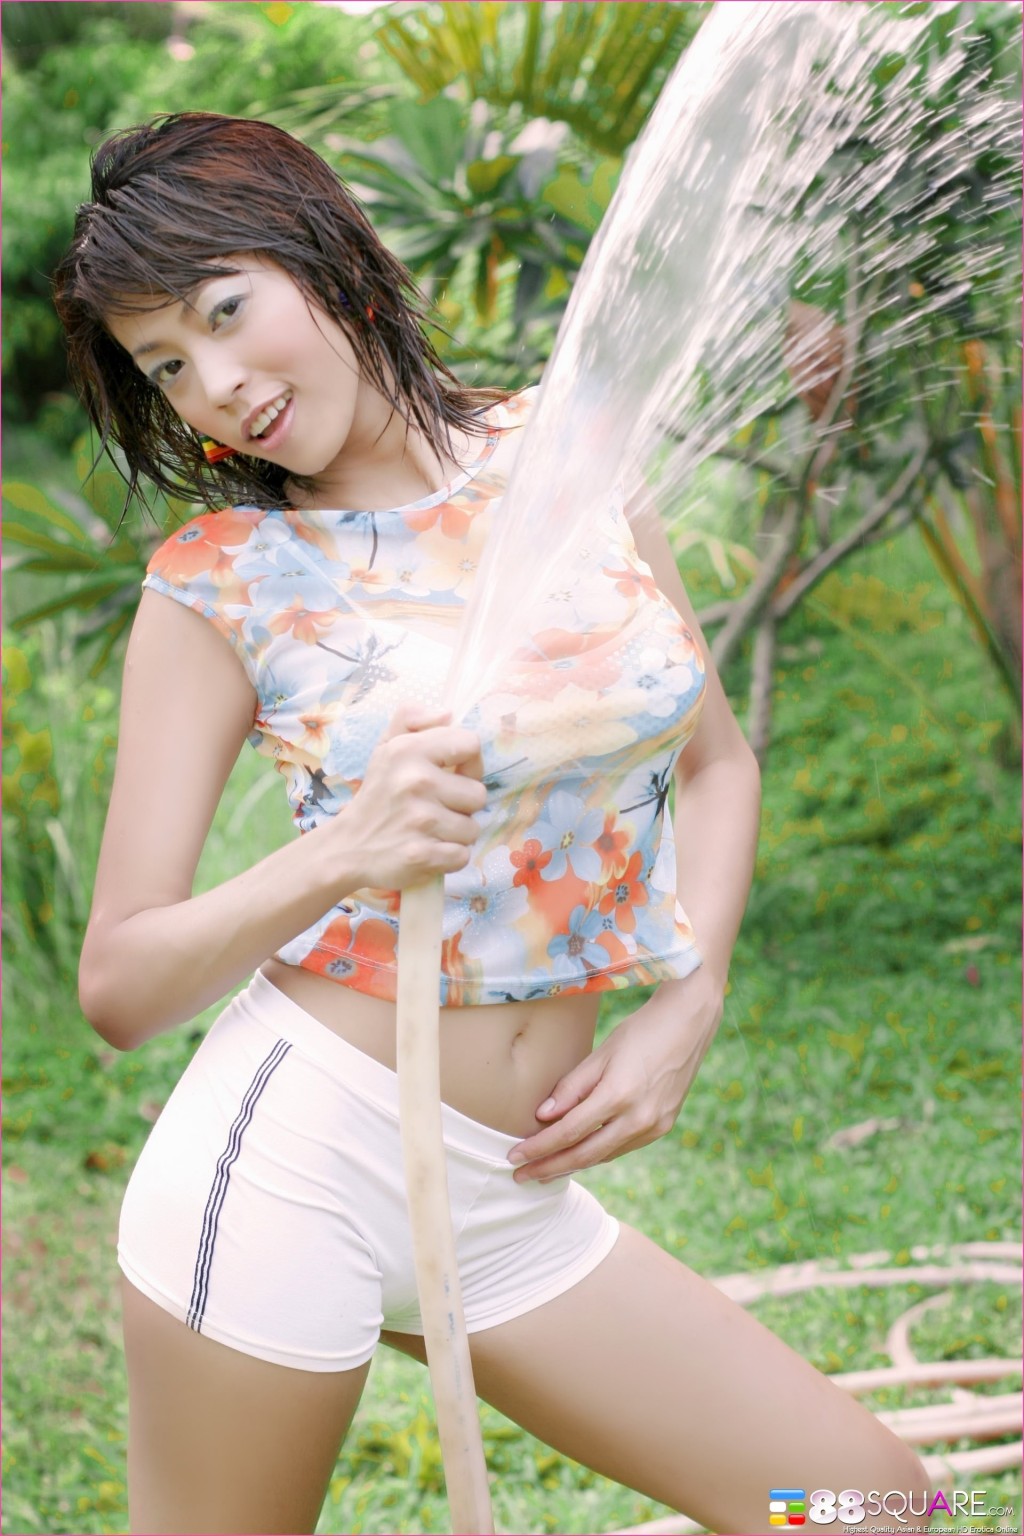 Chan Ching Ming Makes Herself wet with Hose #69835186